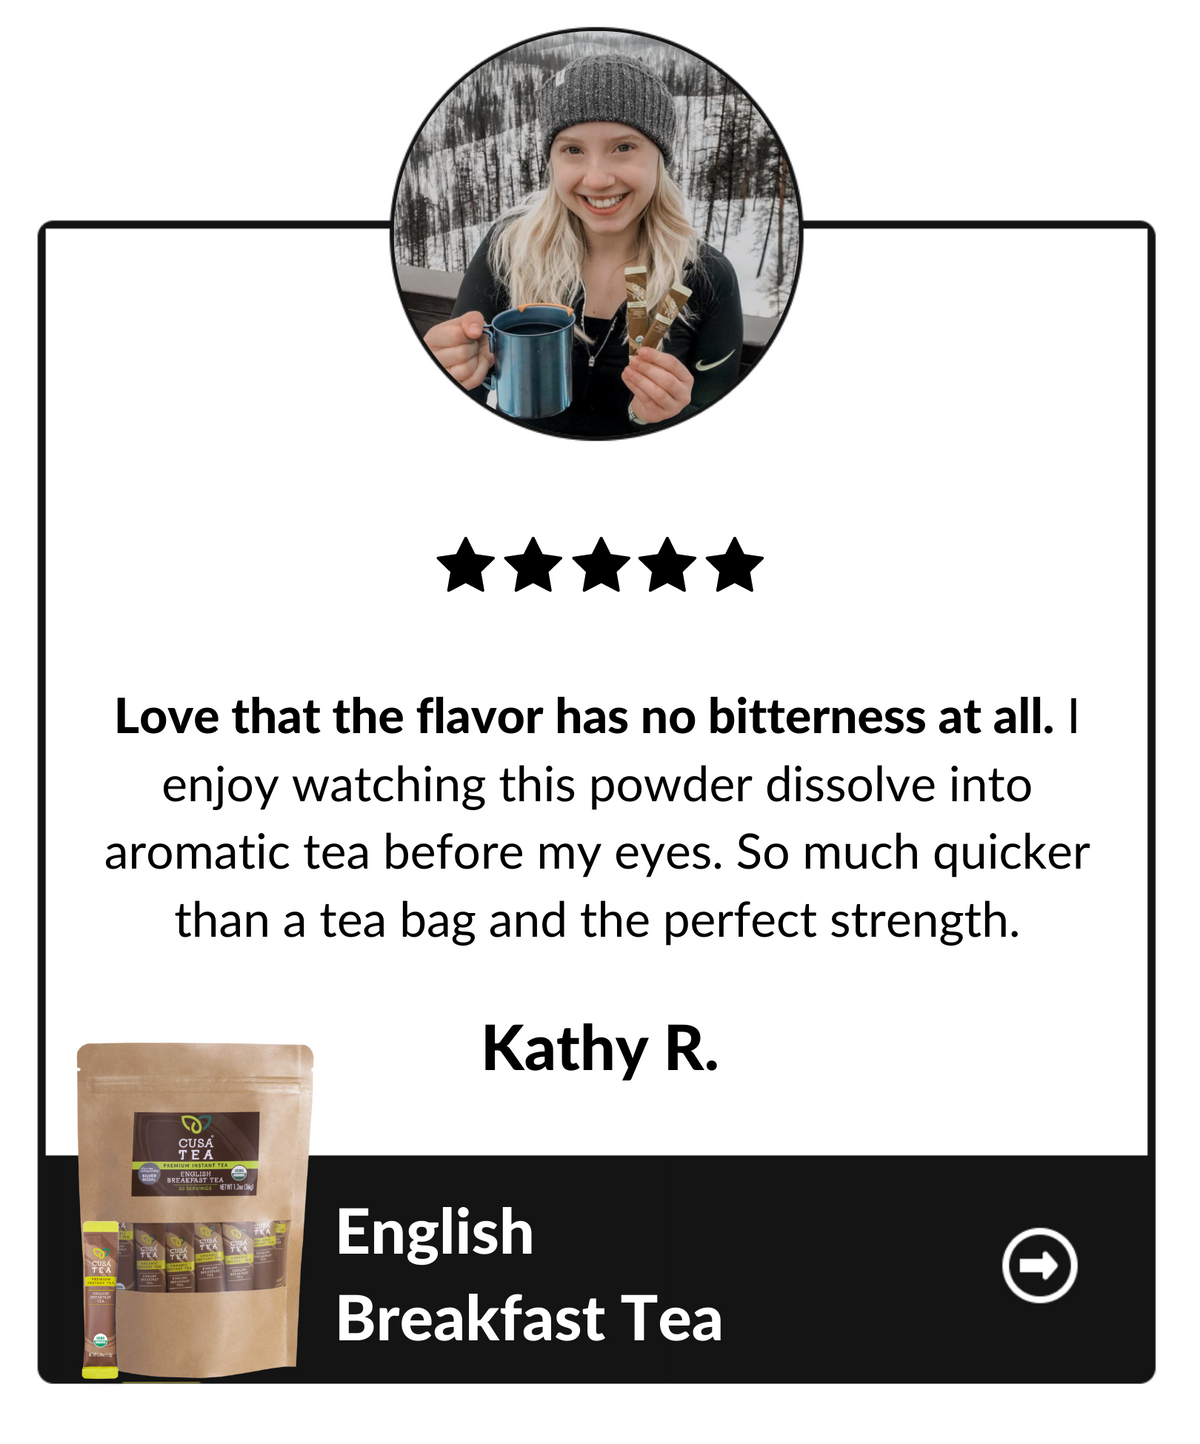 Love that the flavor has no bitterness at all. I enjoy watching this powder dissolve into aromatic tea before my eyes. So much quicker than a tea bag and the perfect strength. Kathy R, English Breakfast Tea testimonial.